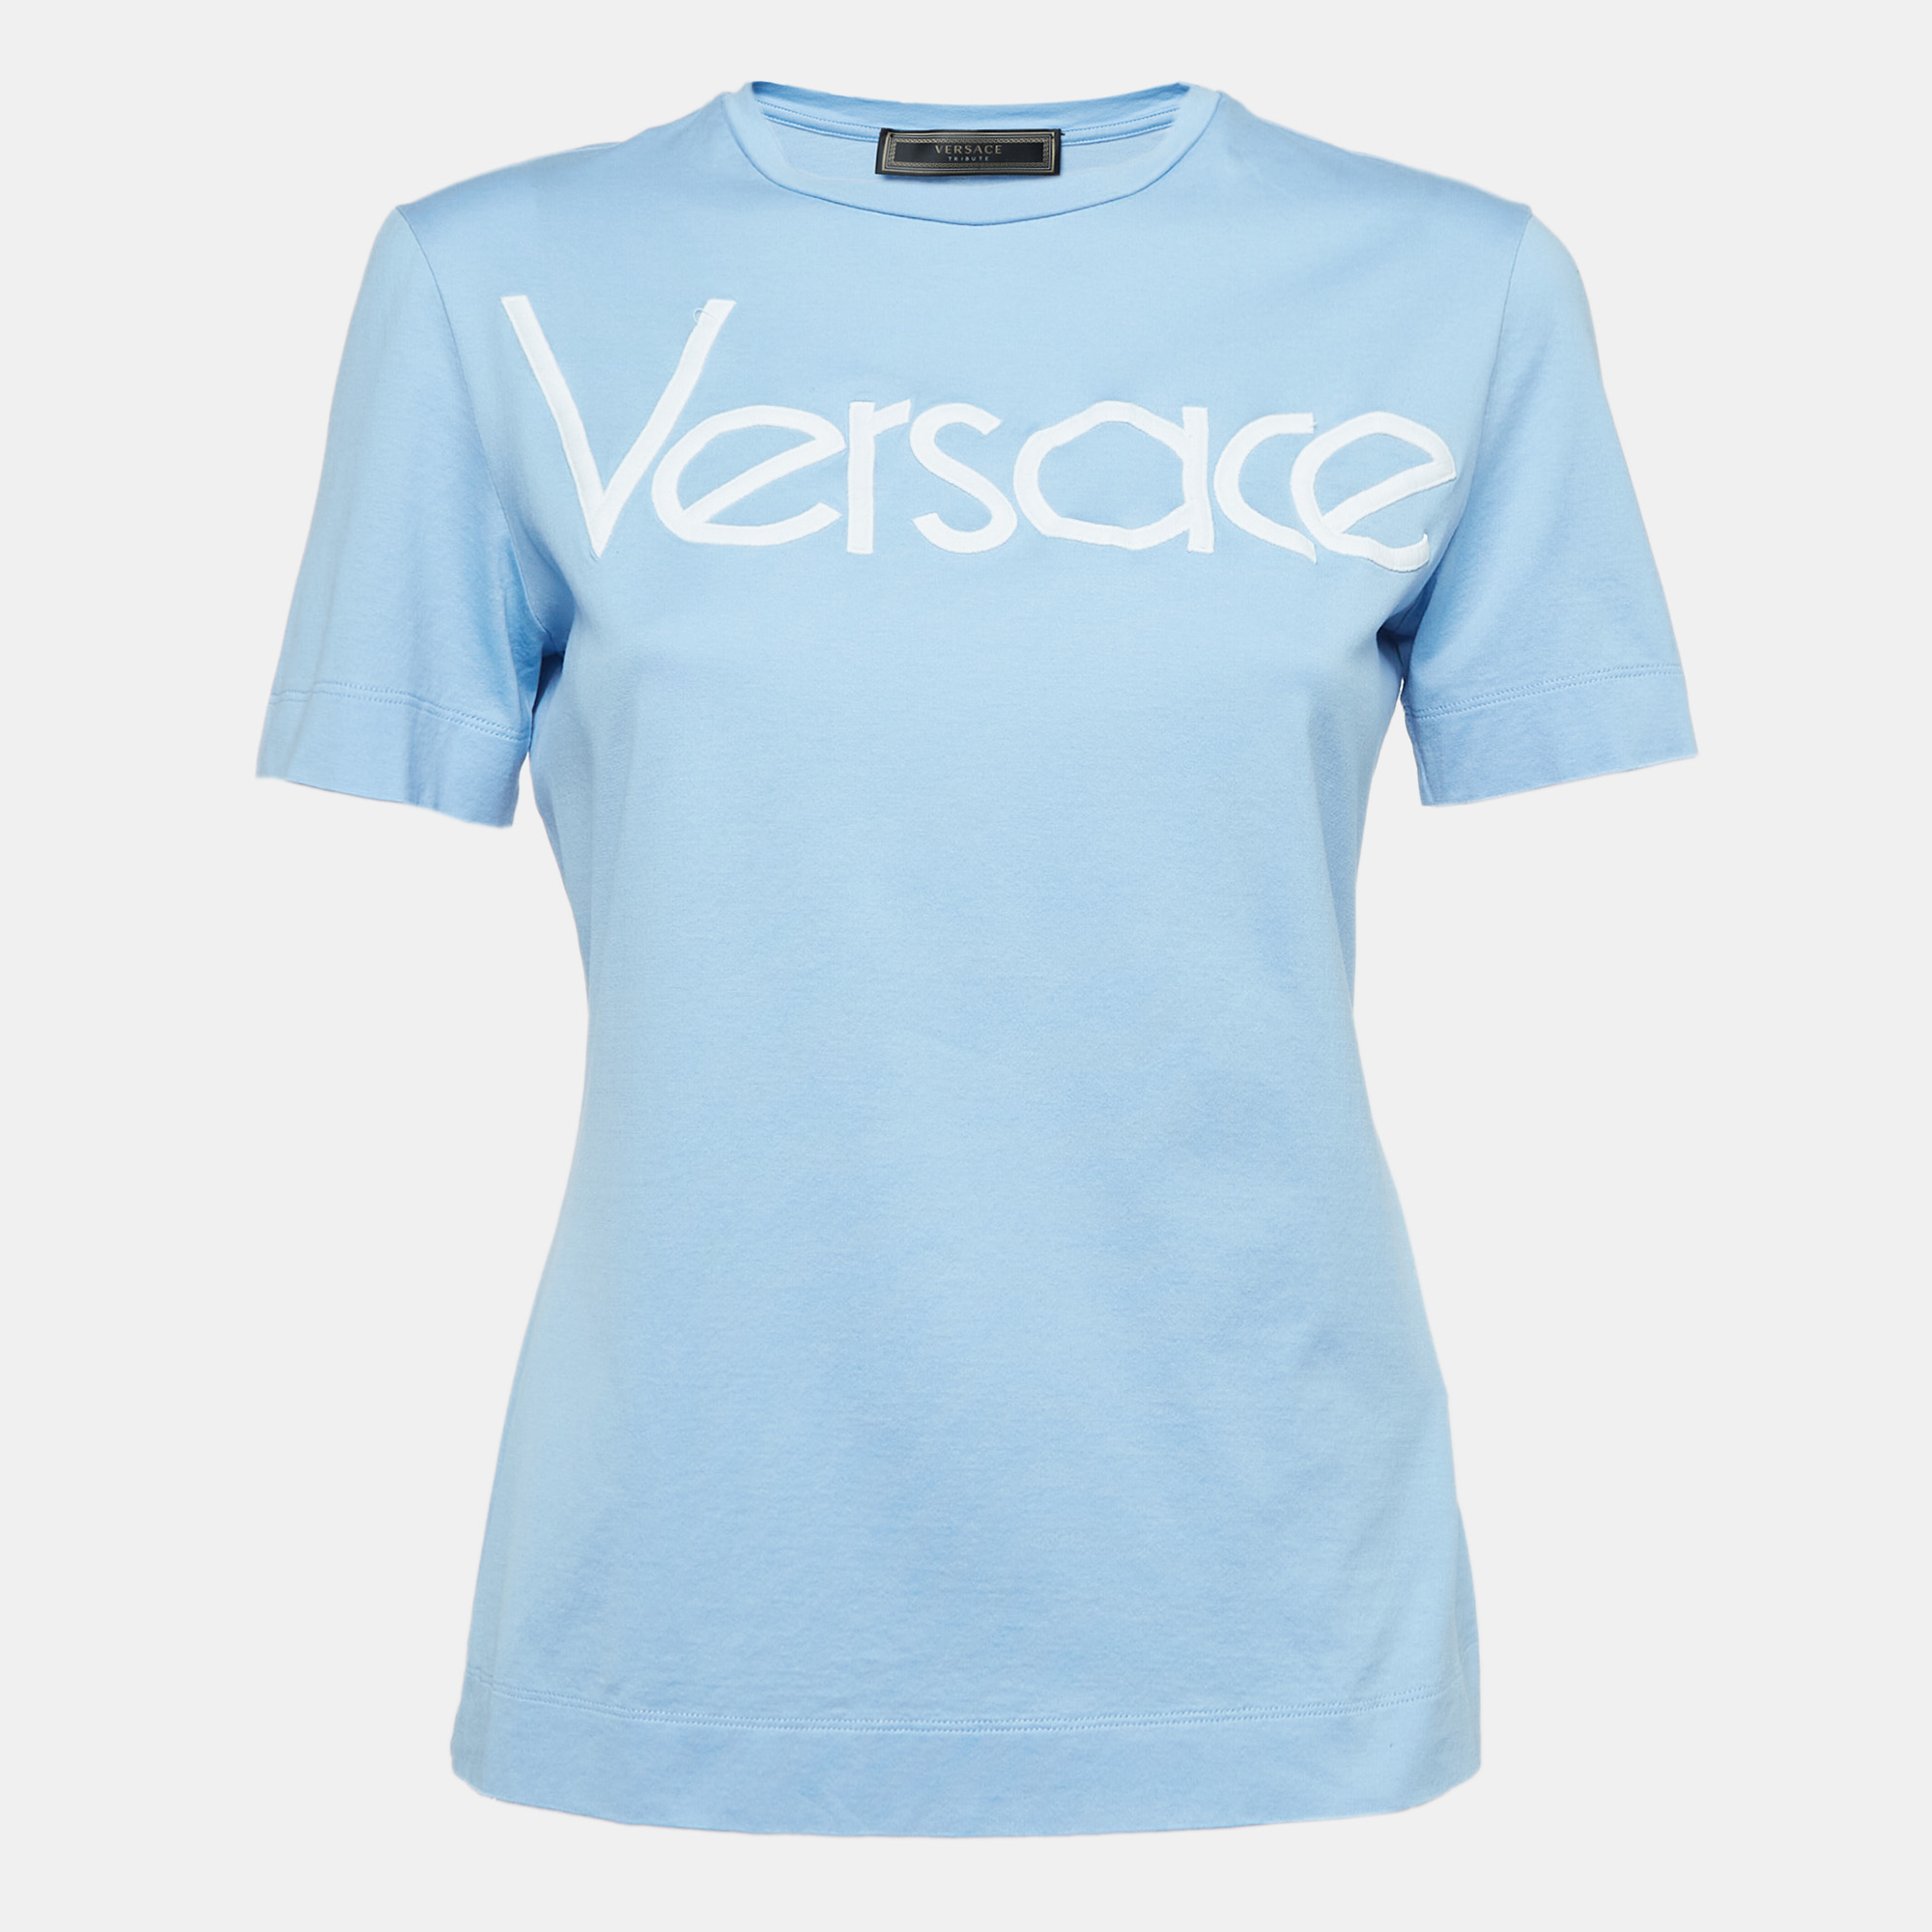 Versace blue embroidered cotton knit tshirt xs